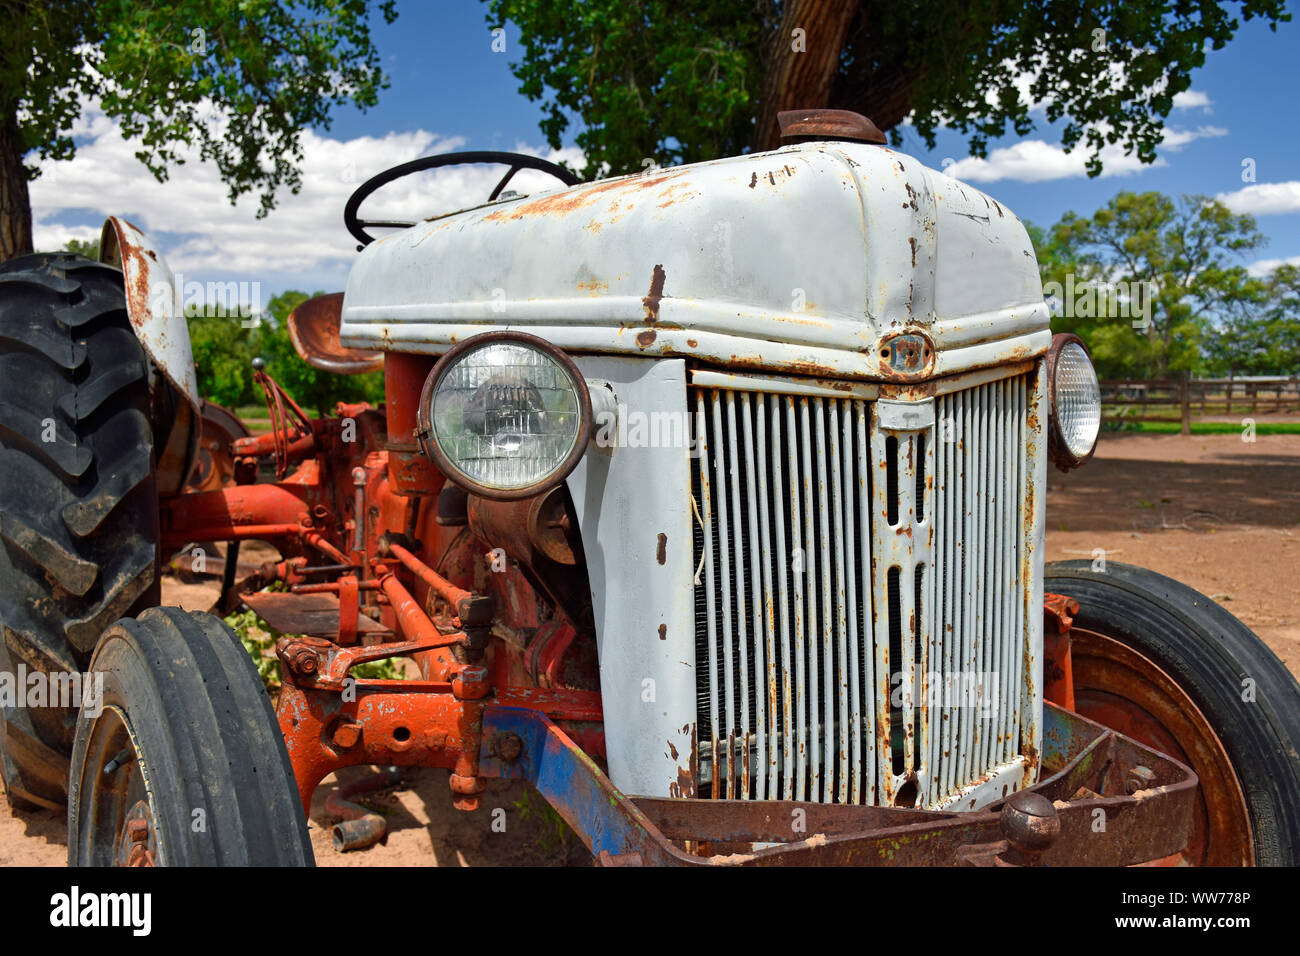 Ford N-Series Rust Bucket Tractor  on a Farm in New Mexico Stock Photo